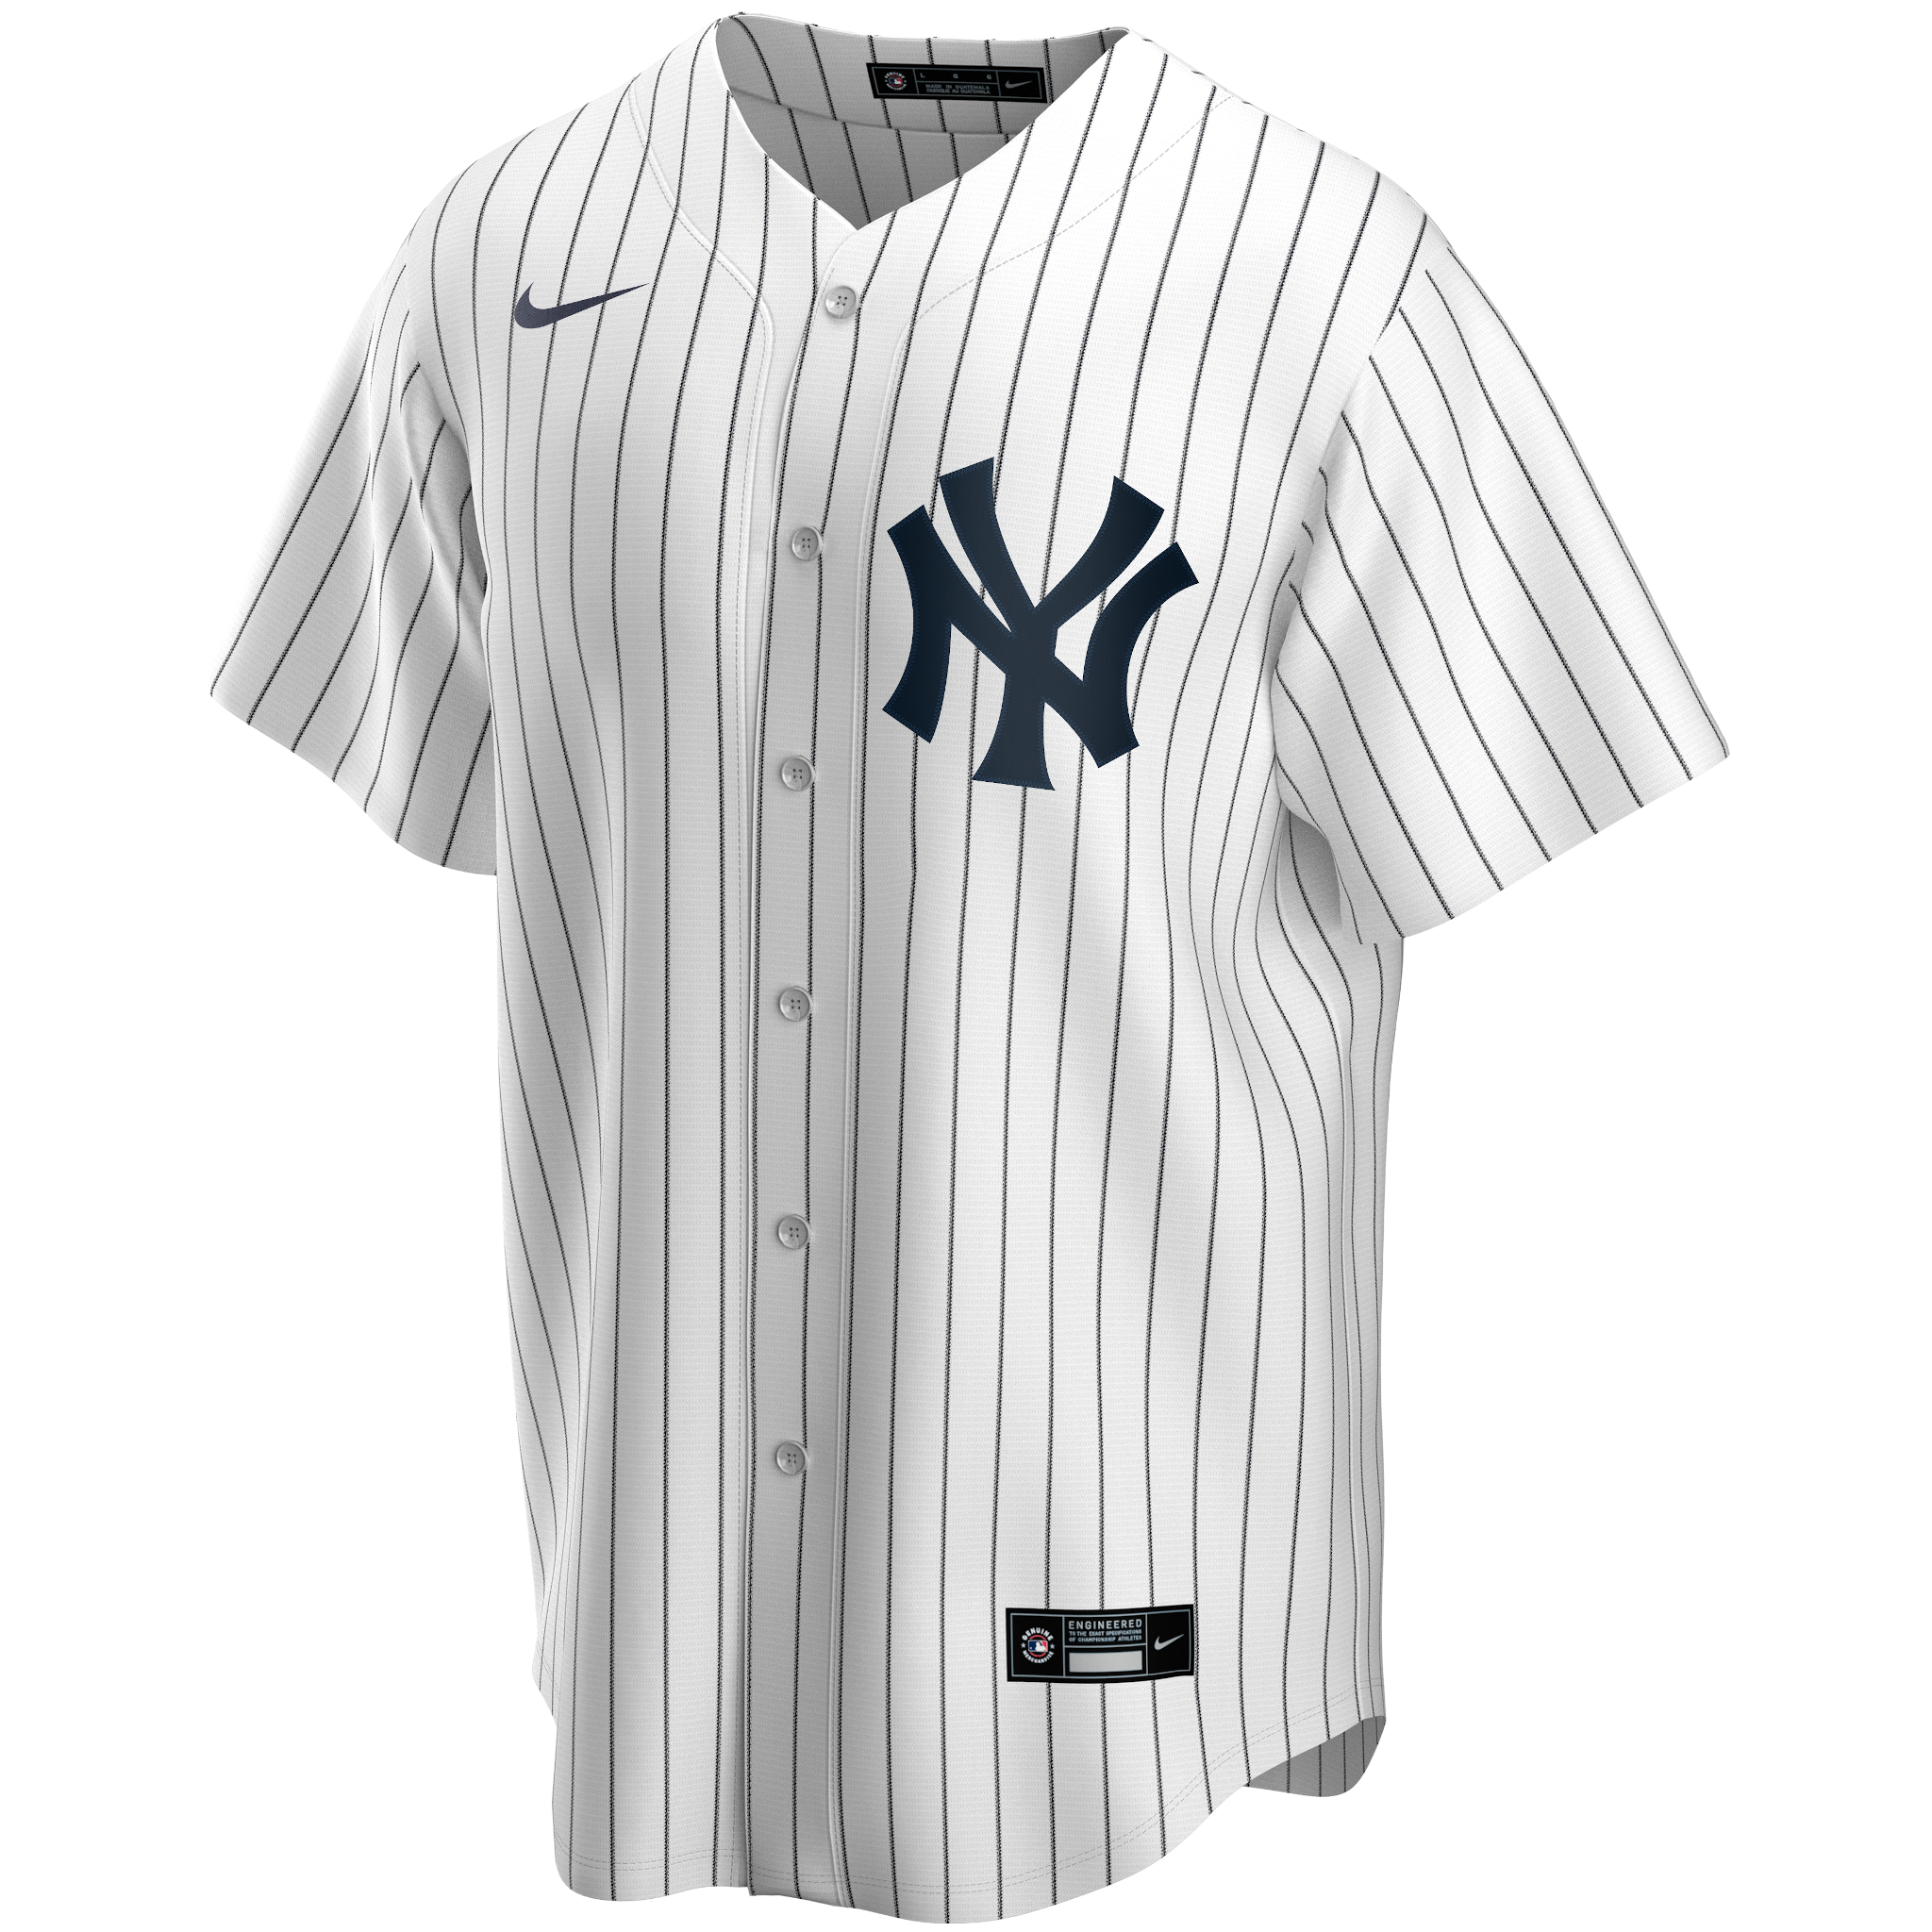 DJ LeMahieu New York Yankees Fanatics Authentic Game-Used #26 White  Pinstripe Jersey vs. San Francisco Giants on March 30, 2023